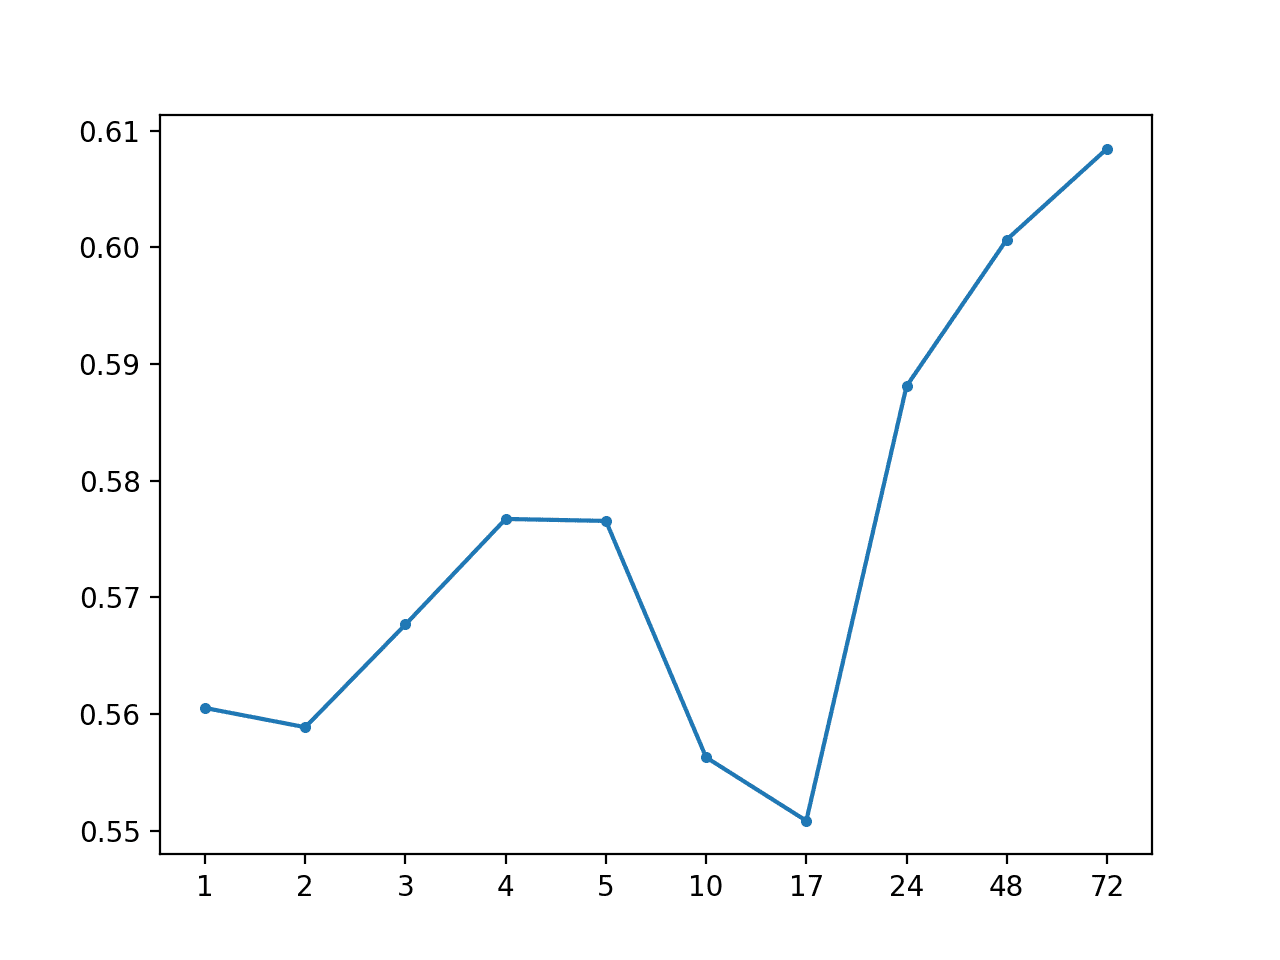 MAE by Forecast Lead Time via Local Median By Hour of Day